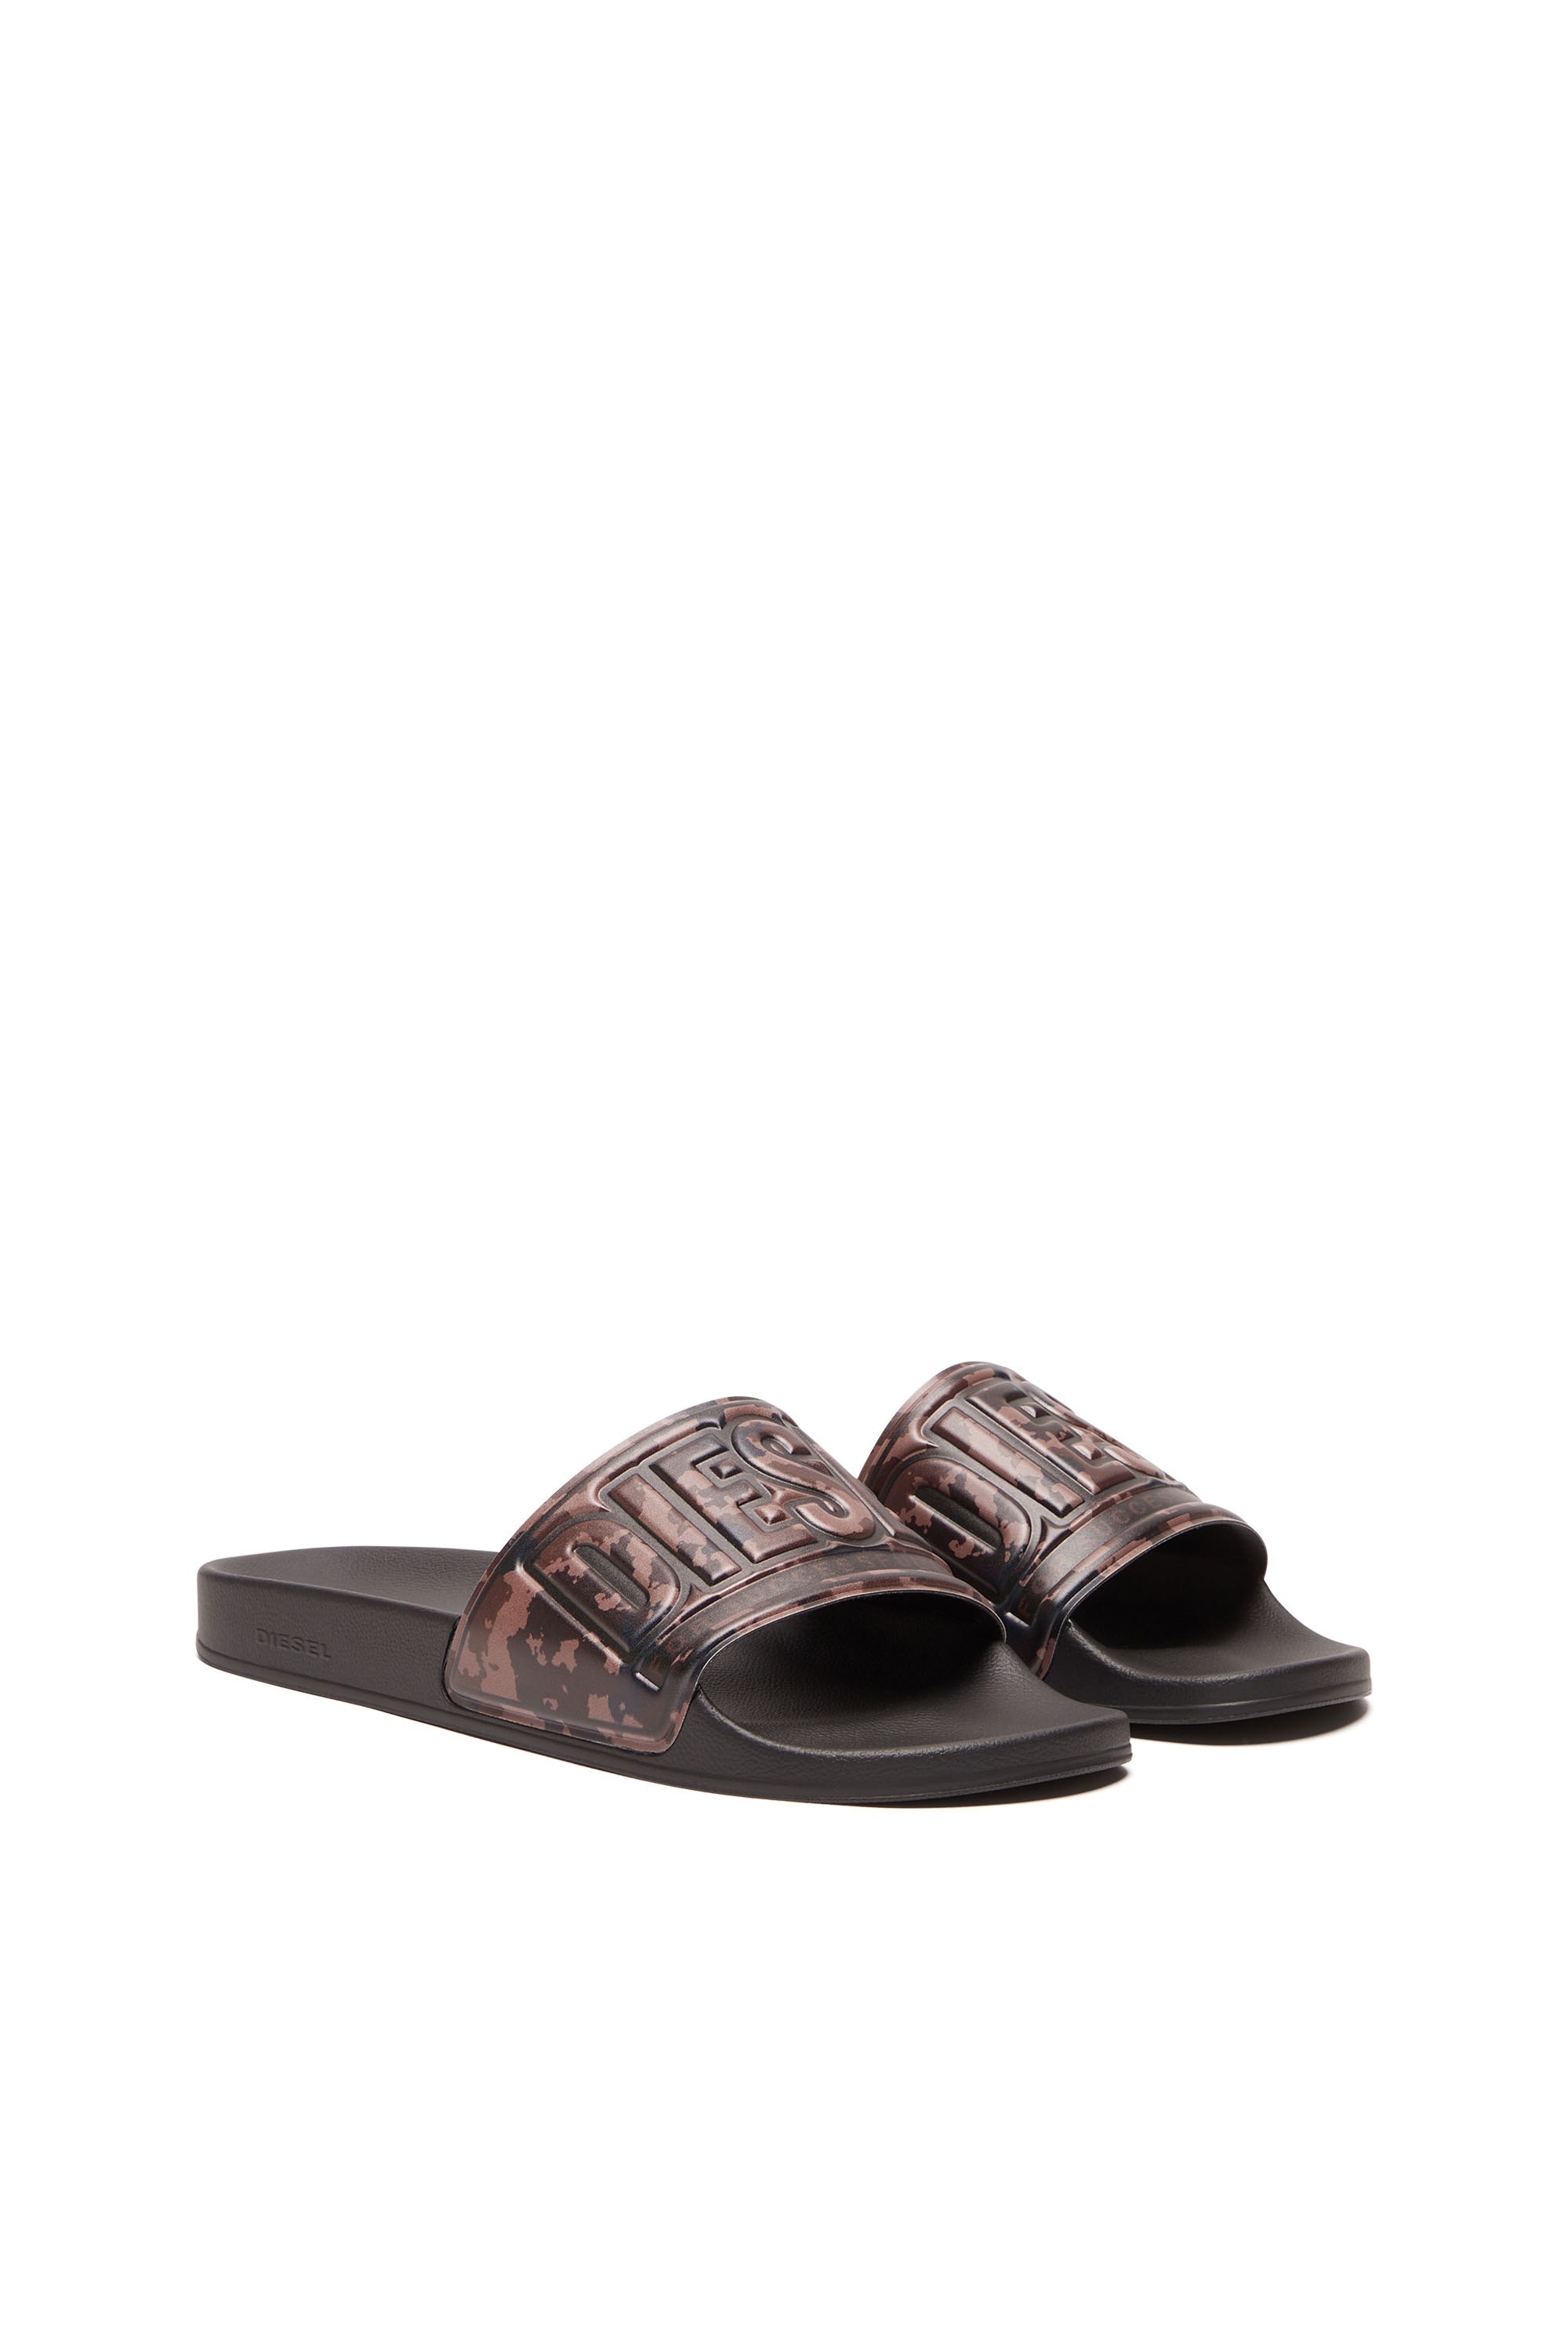 Women's Pool slides with camouflage band | SA-MAYEMI CC X Diesel